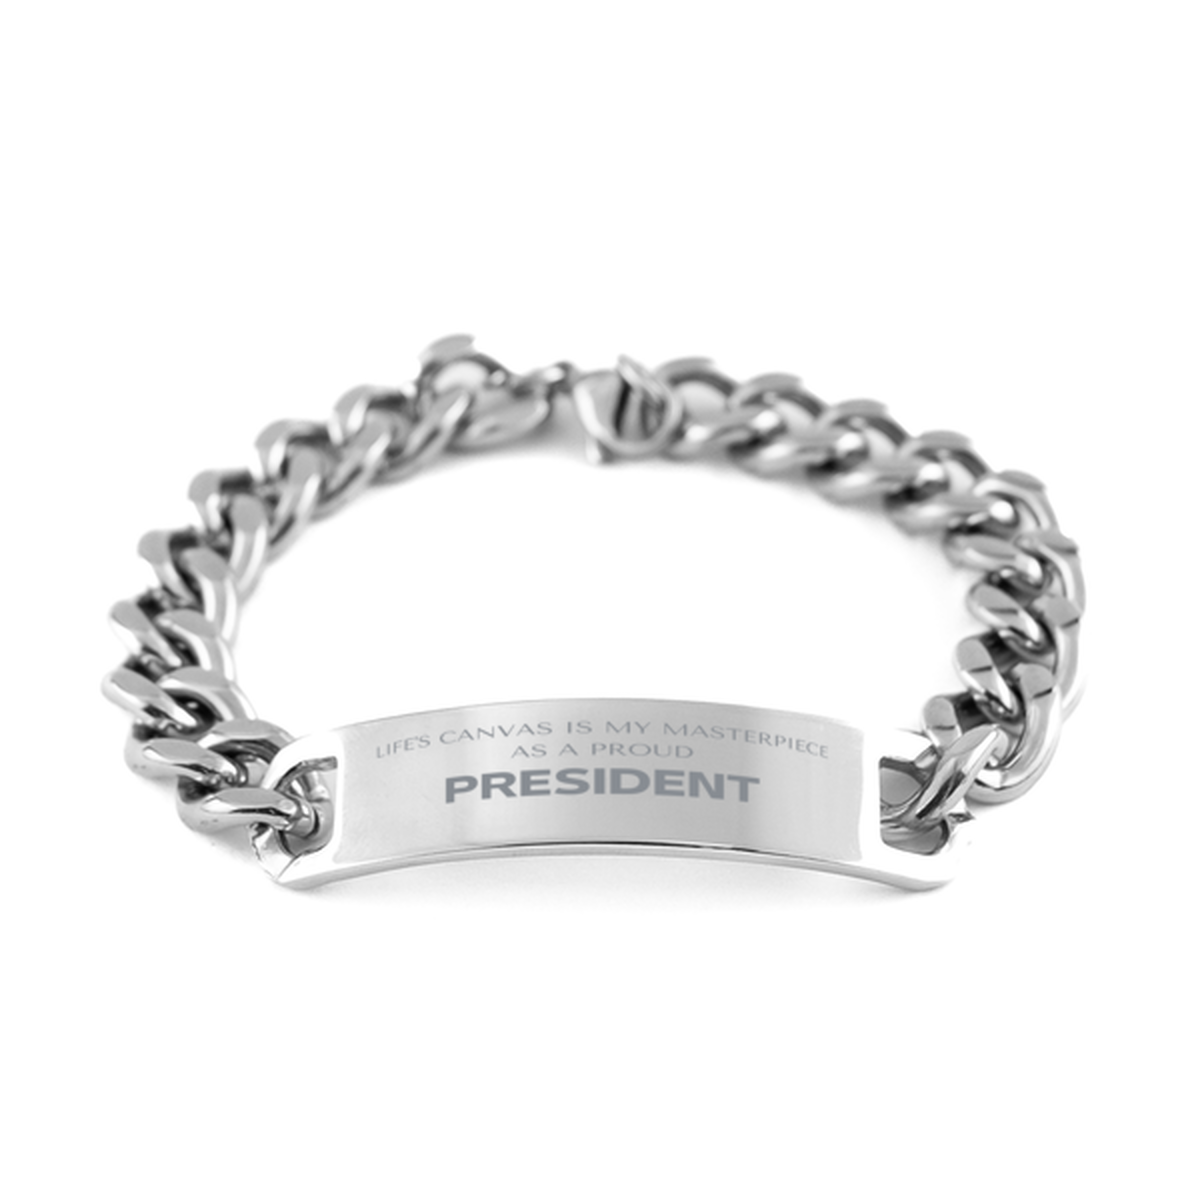 Proud President Gifts, Life's canvas is my masterpiece, Epic Birthday Christmas Unique Cuban Chain Stainless Steel Bracelet For President, Coworkers, Men, Women, Friends